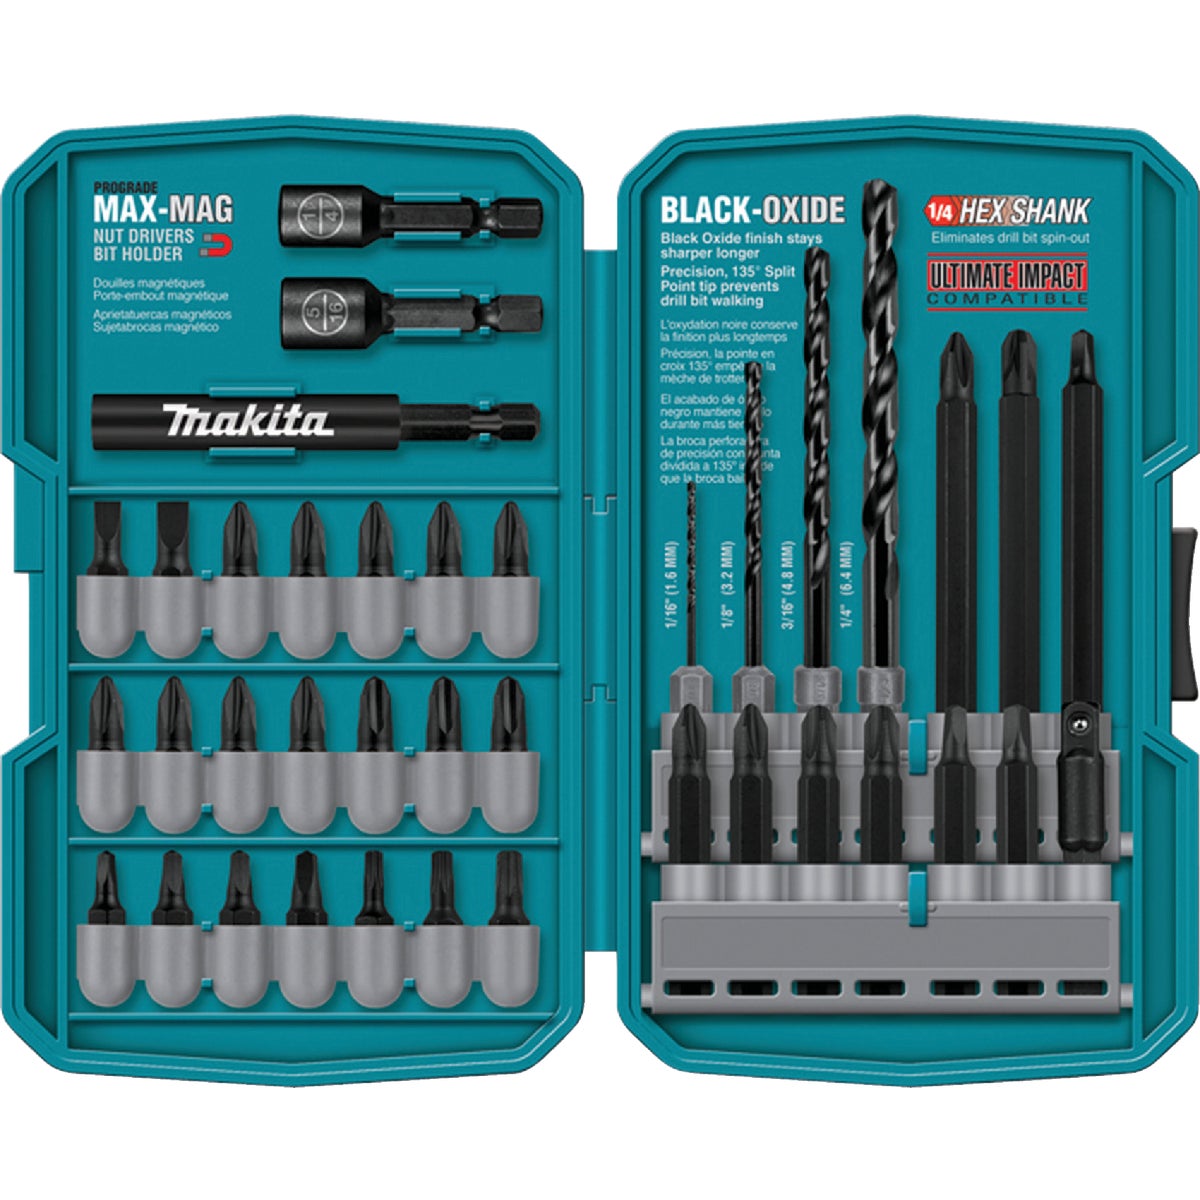 Item 301315, Set features the most popular sizes of screwdriving bits, drill bits and 